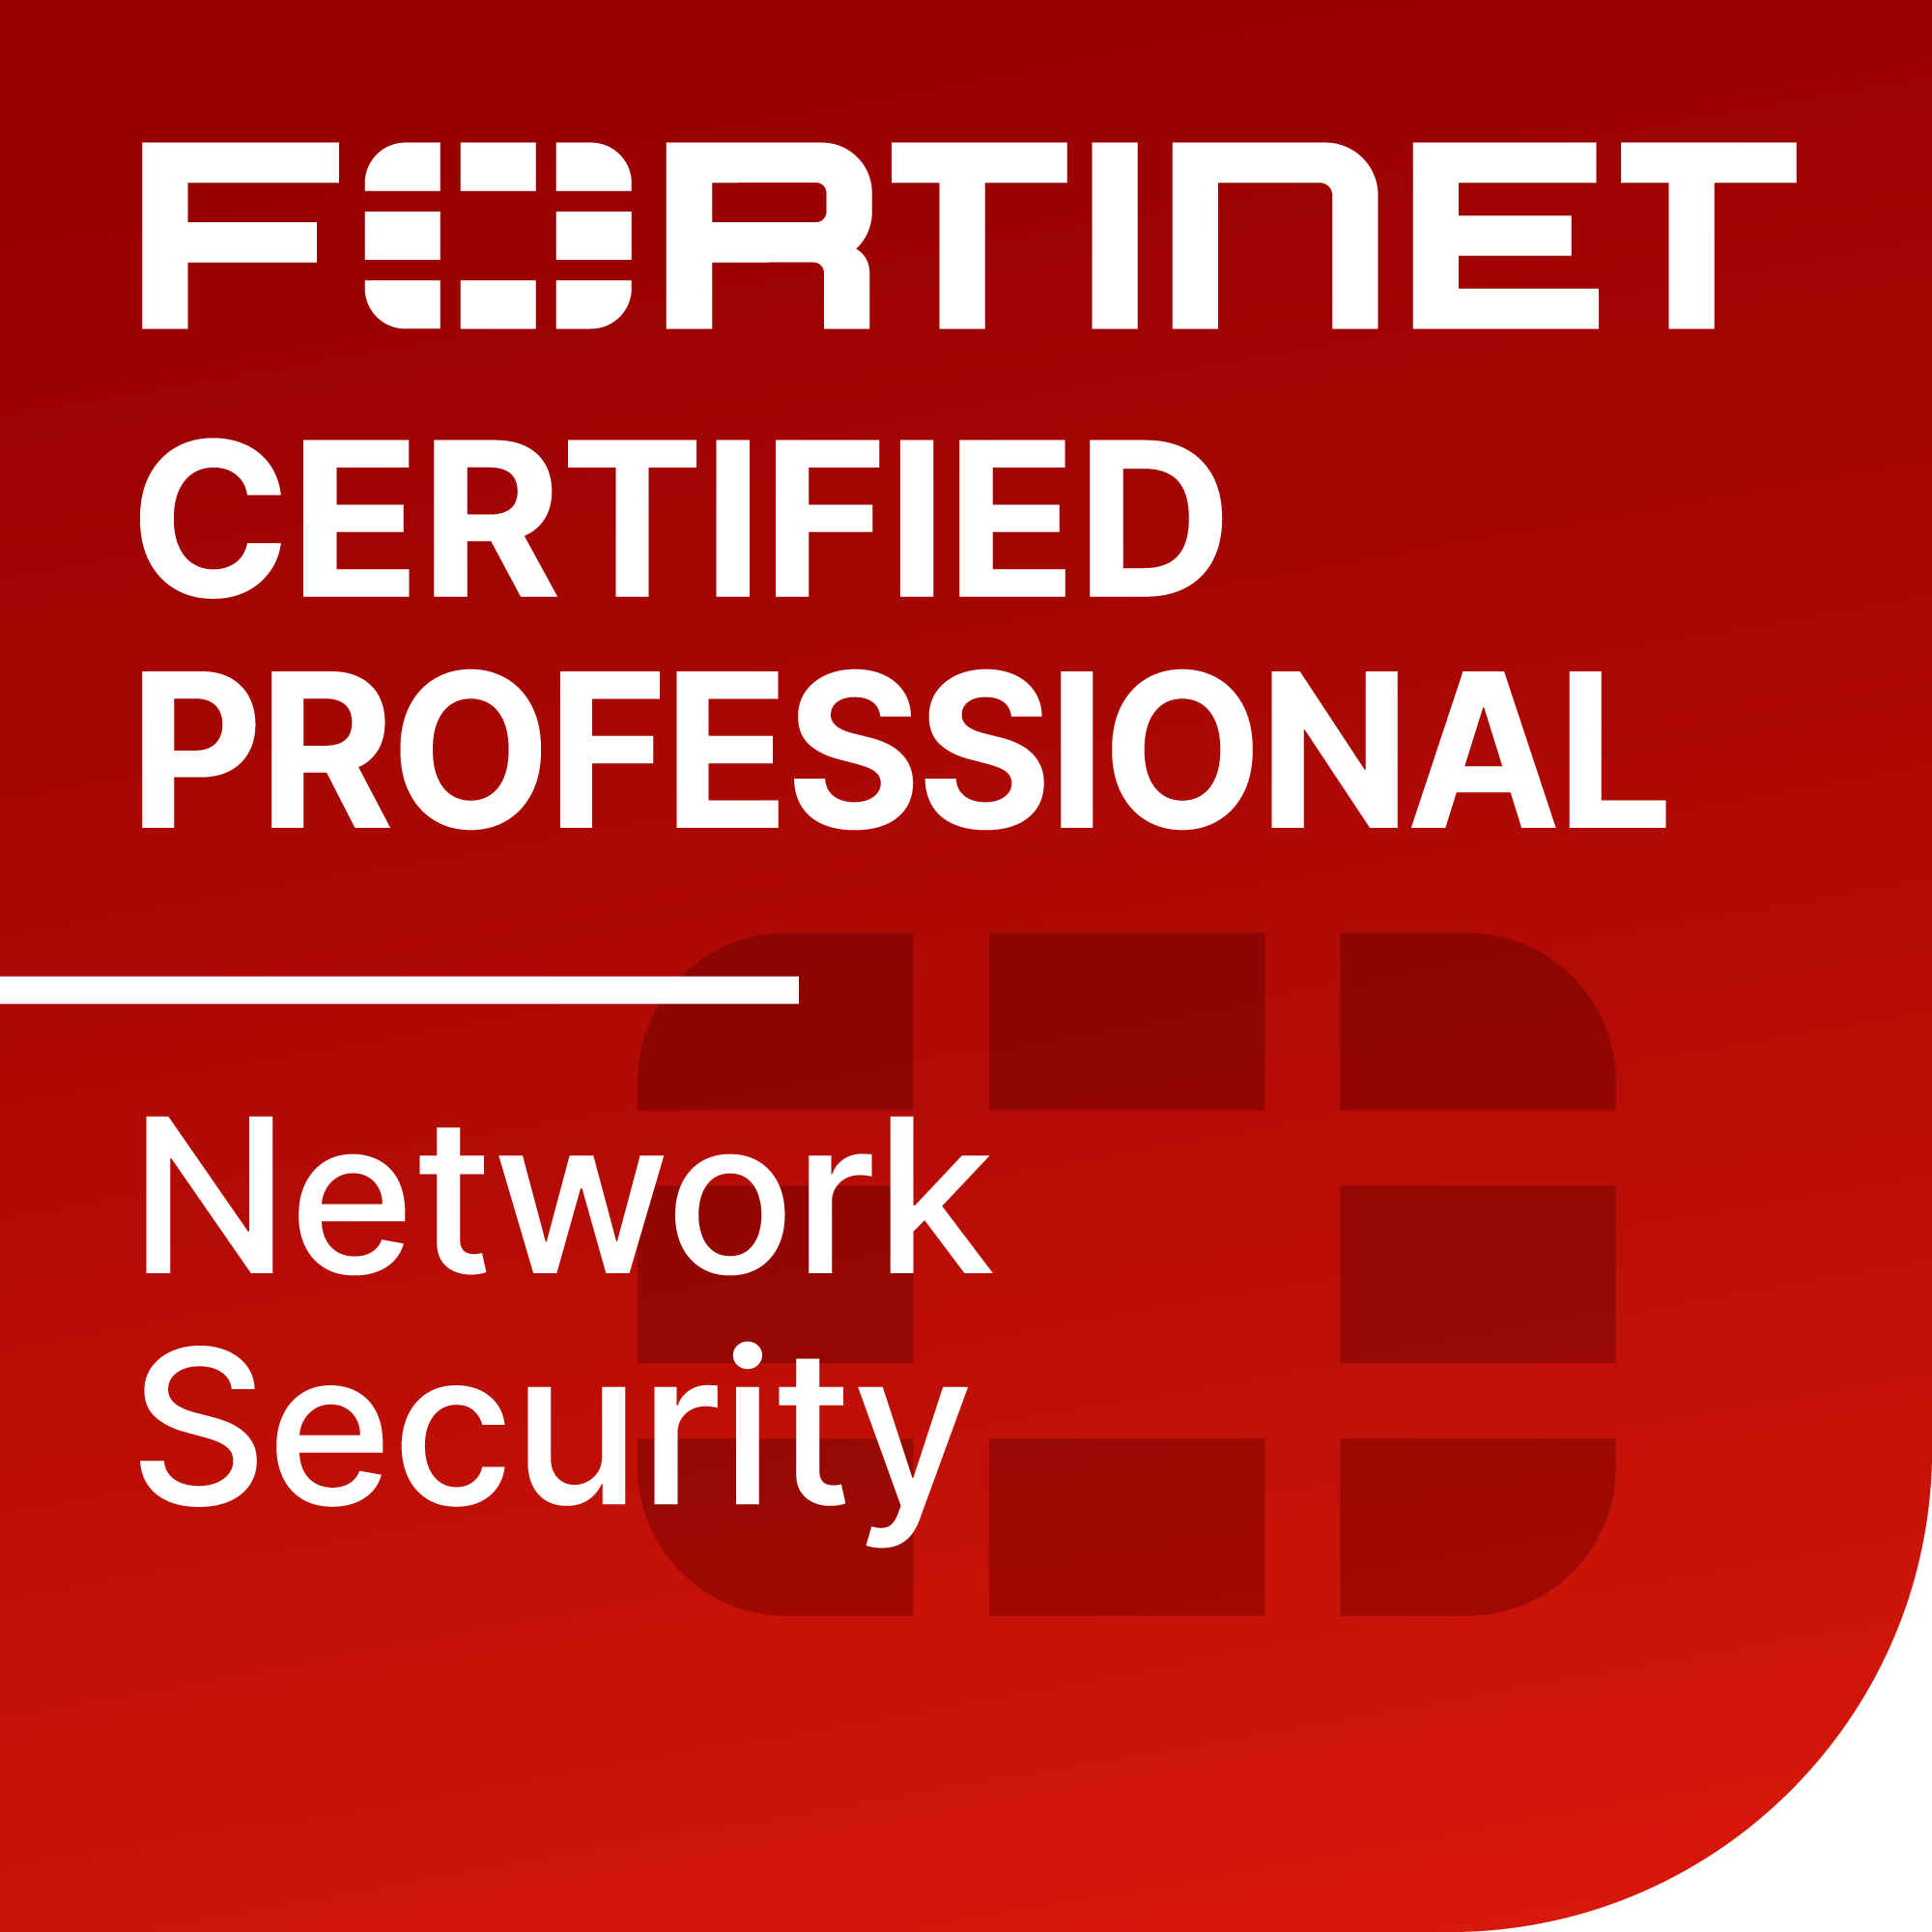 Fortinet Certified Professional in Network Security Certification